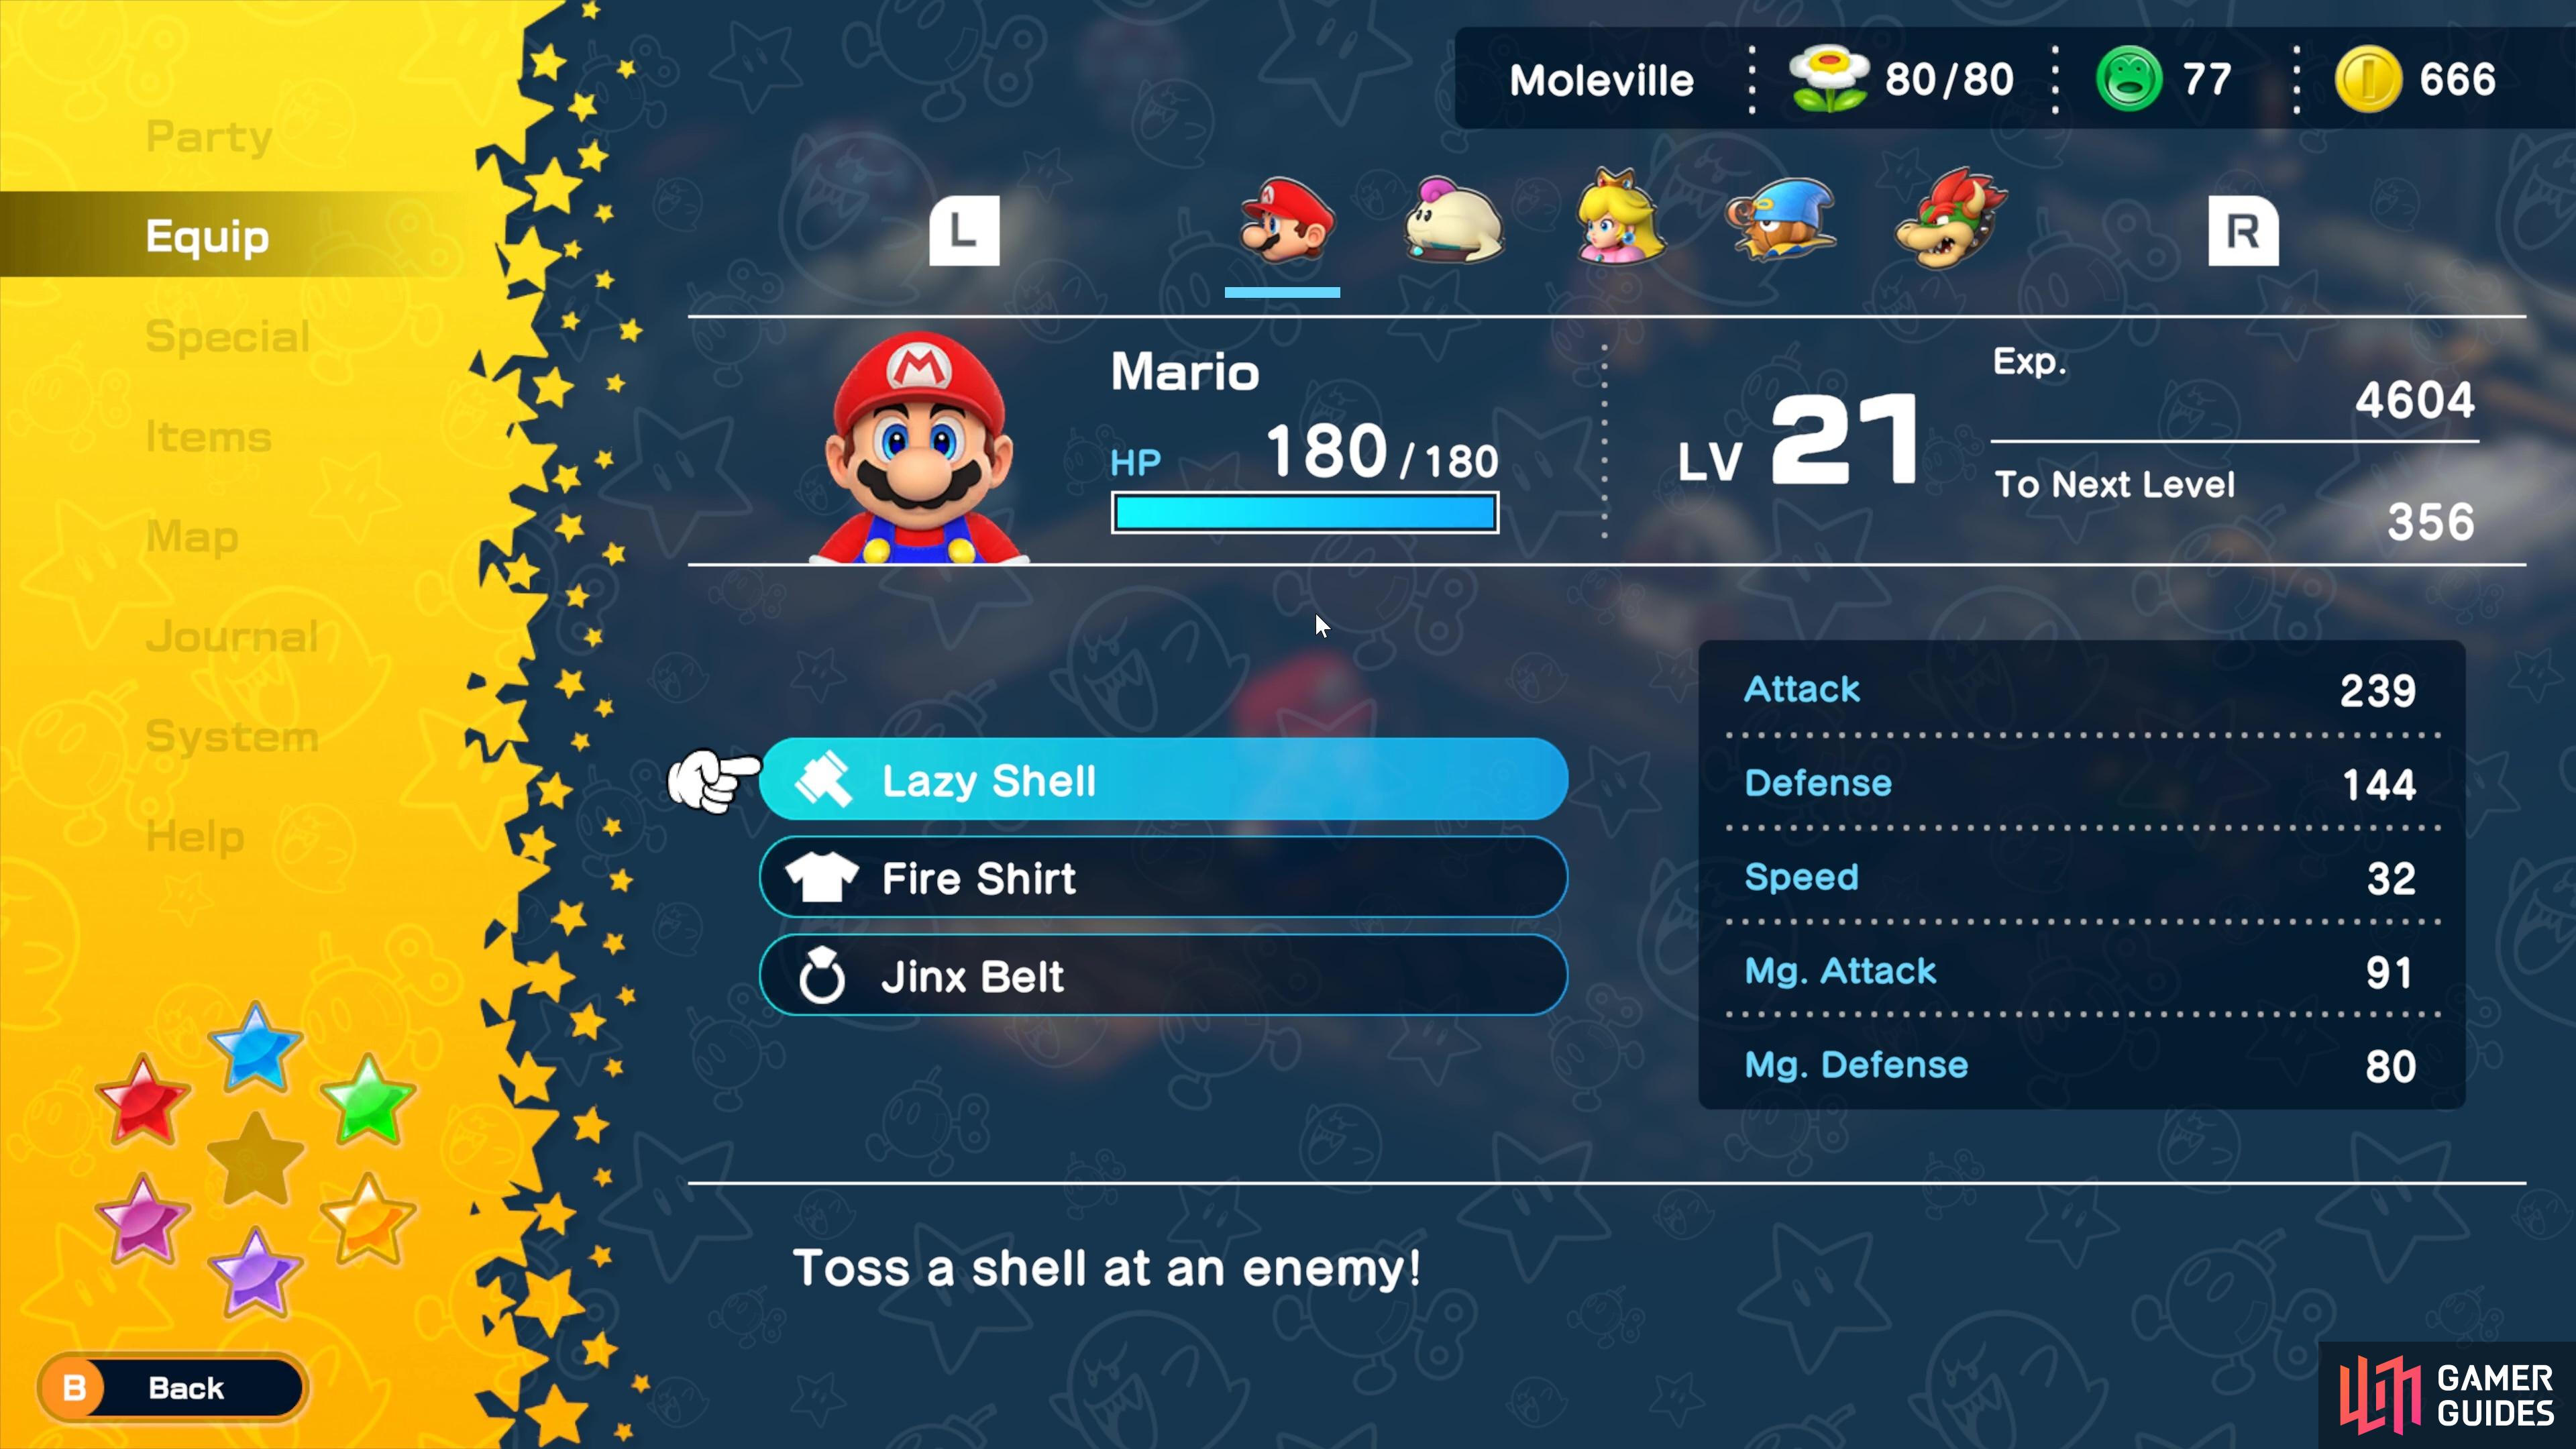 The Lazy Shell is the strongest Mario weapon in the game!